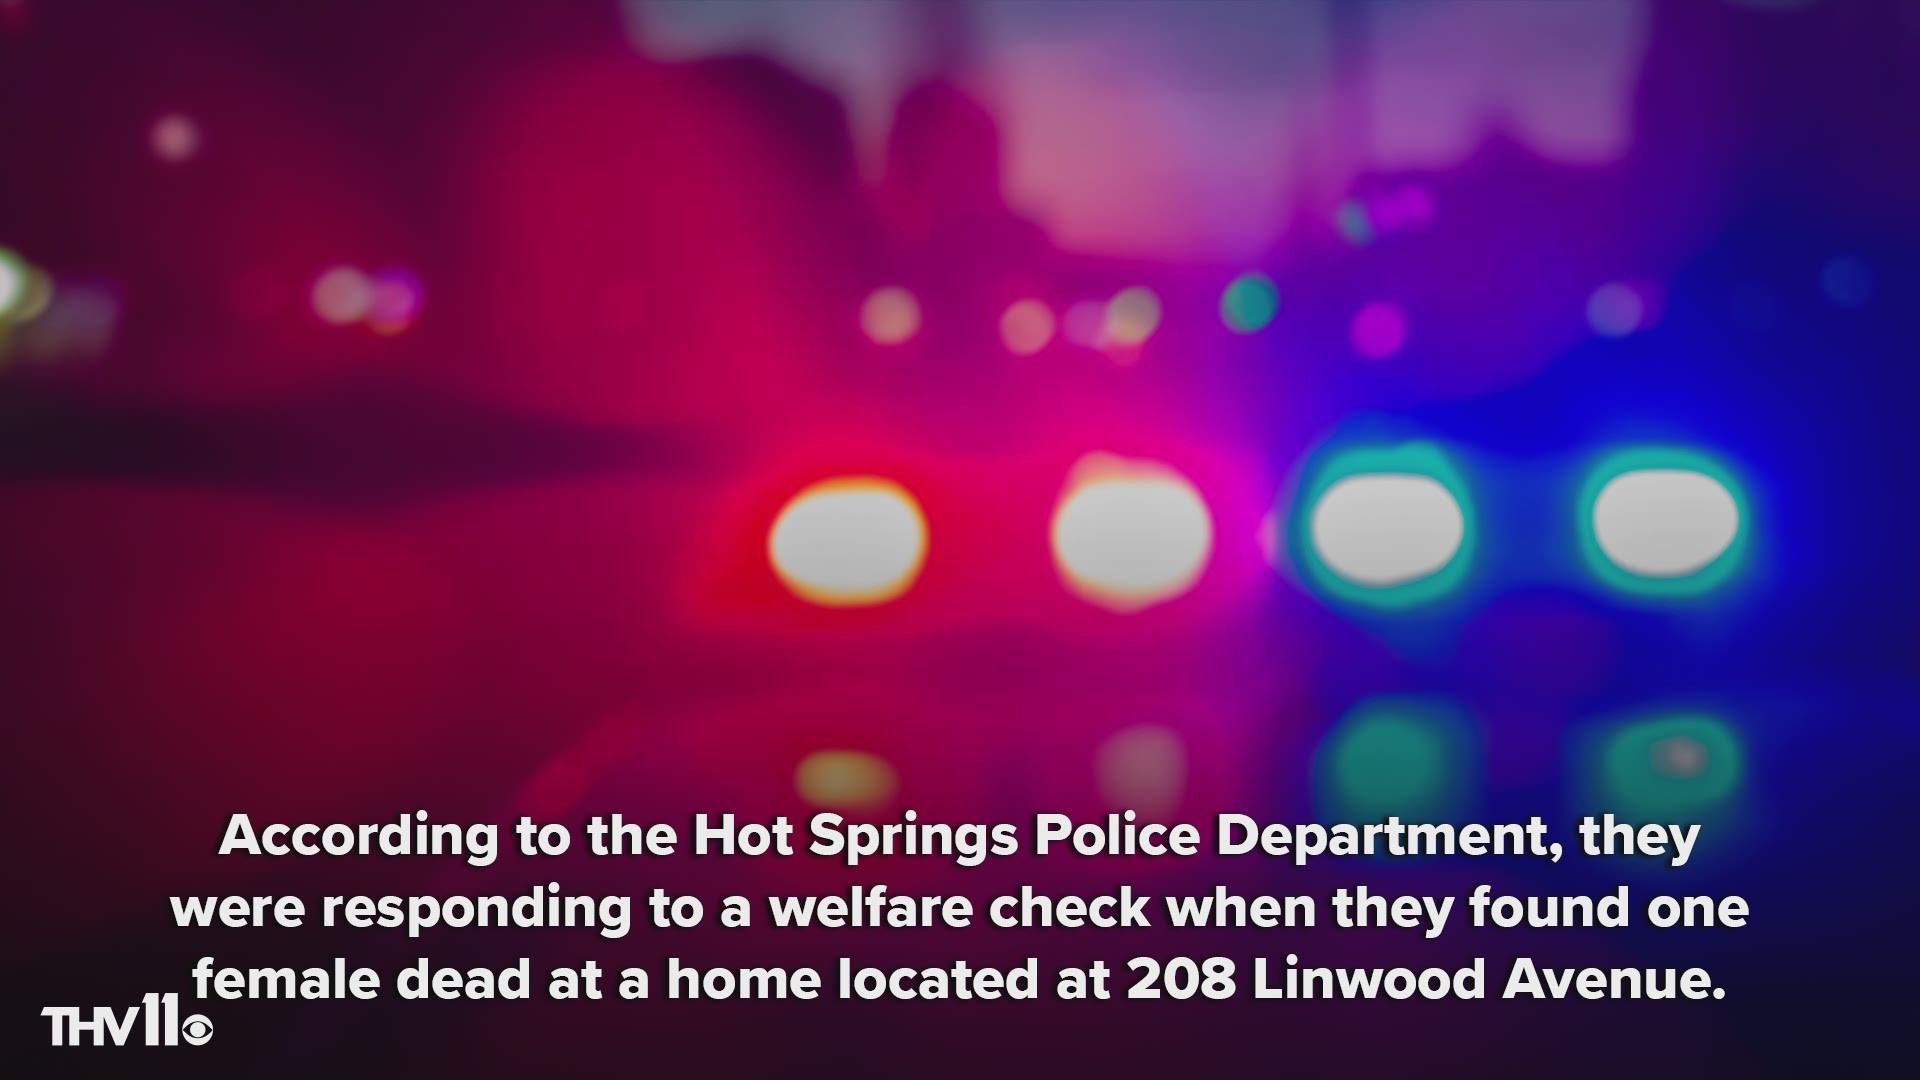 According to the Hot Springs Police Department, they were responding to a welfare check when they found one female dead at a home located at 208 Linwood Avenue.